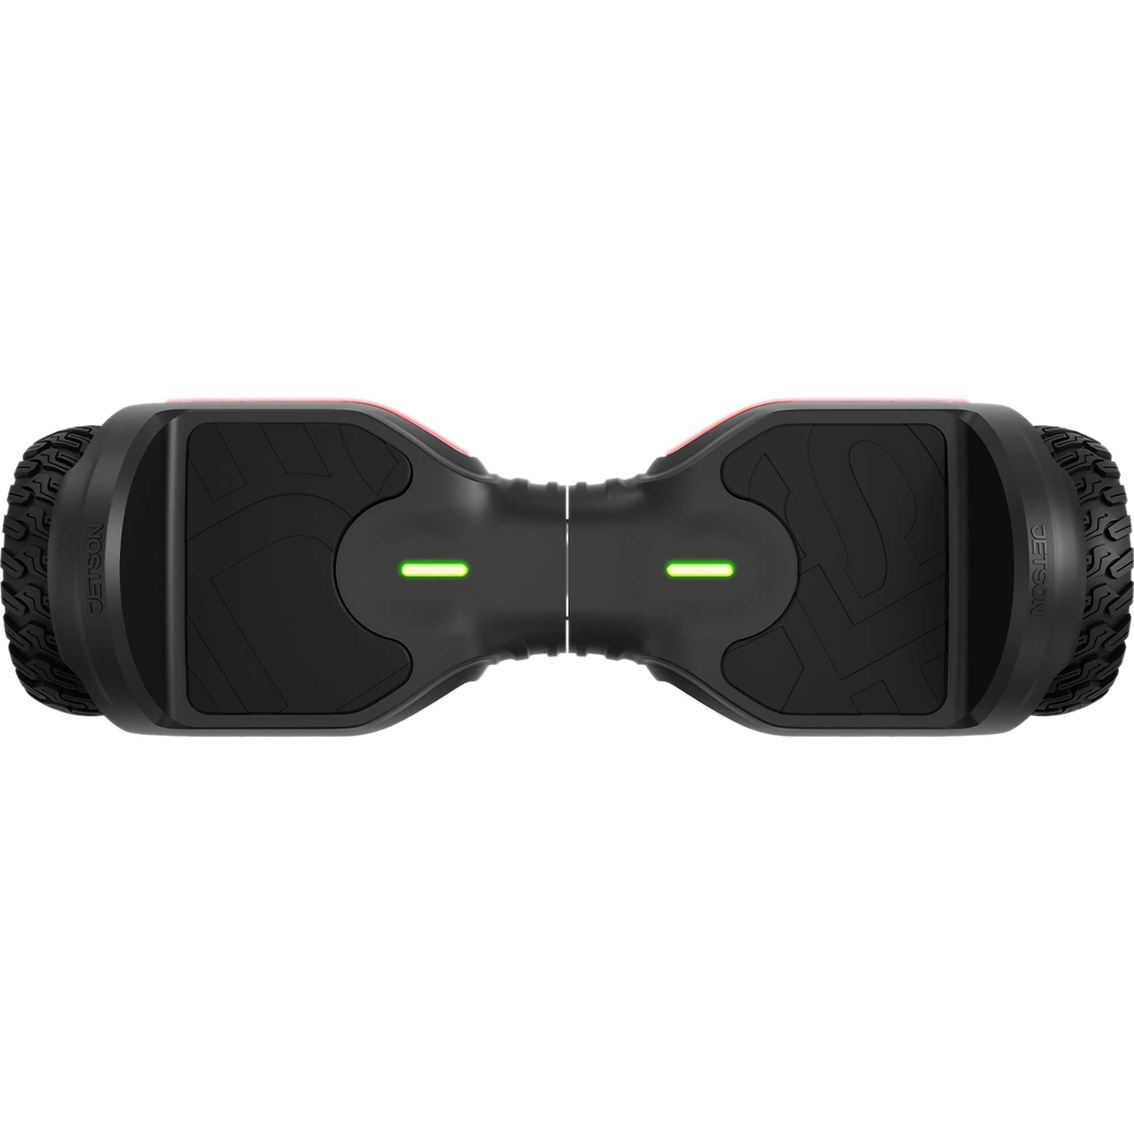 Jetson Flash Self Balancing Hoverboard with Built In Bluetooth Speaker - Image 6 of 10